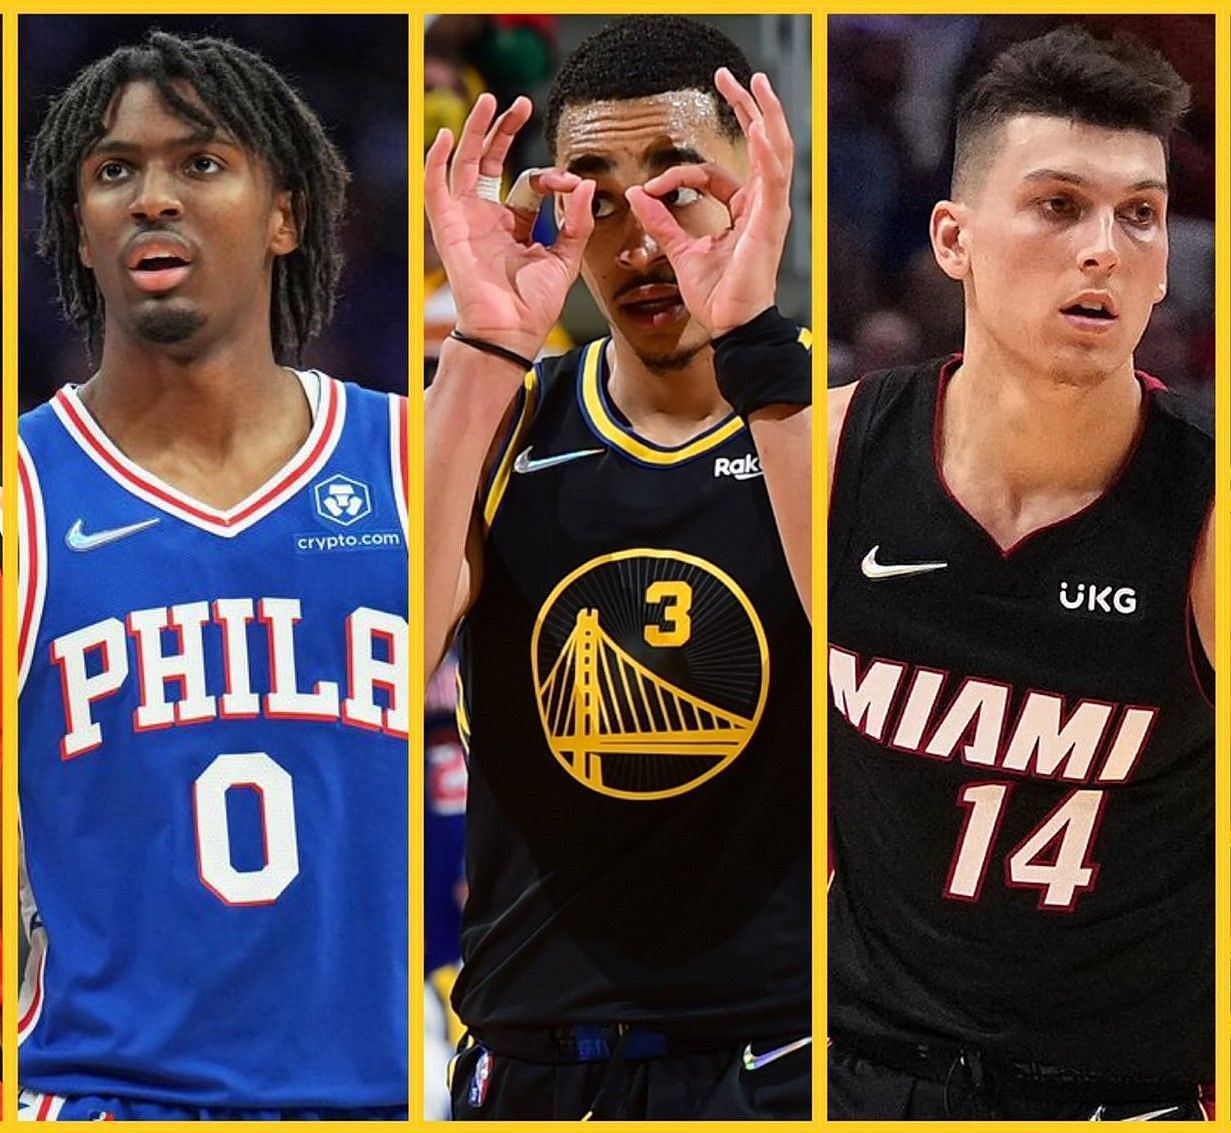 The NBA is filled with explosive young stars